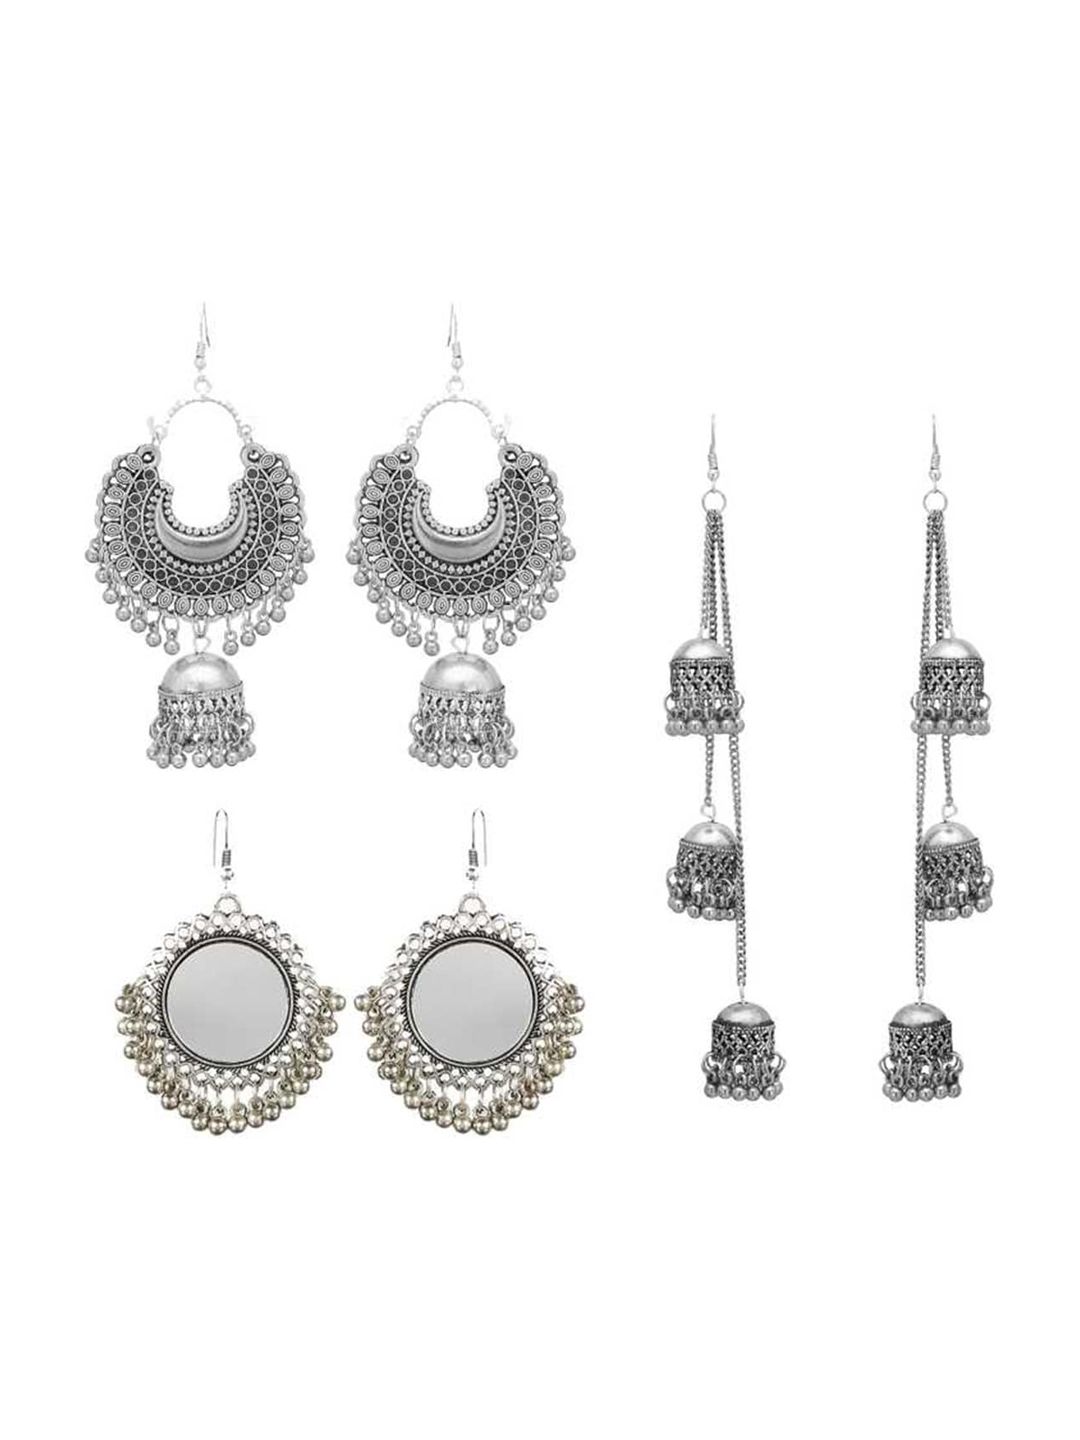 Vembley Set Of 3 Silver-Toned Classic Drop Earrings Price in India